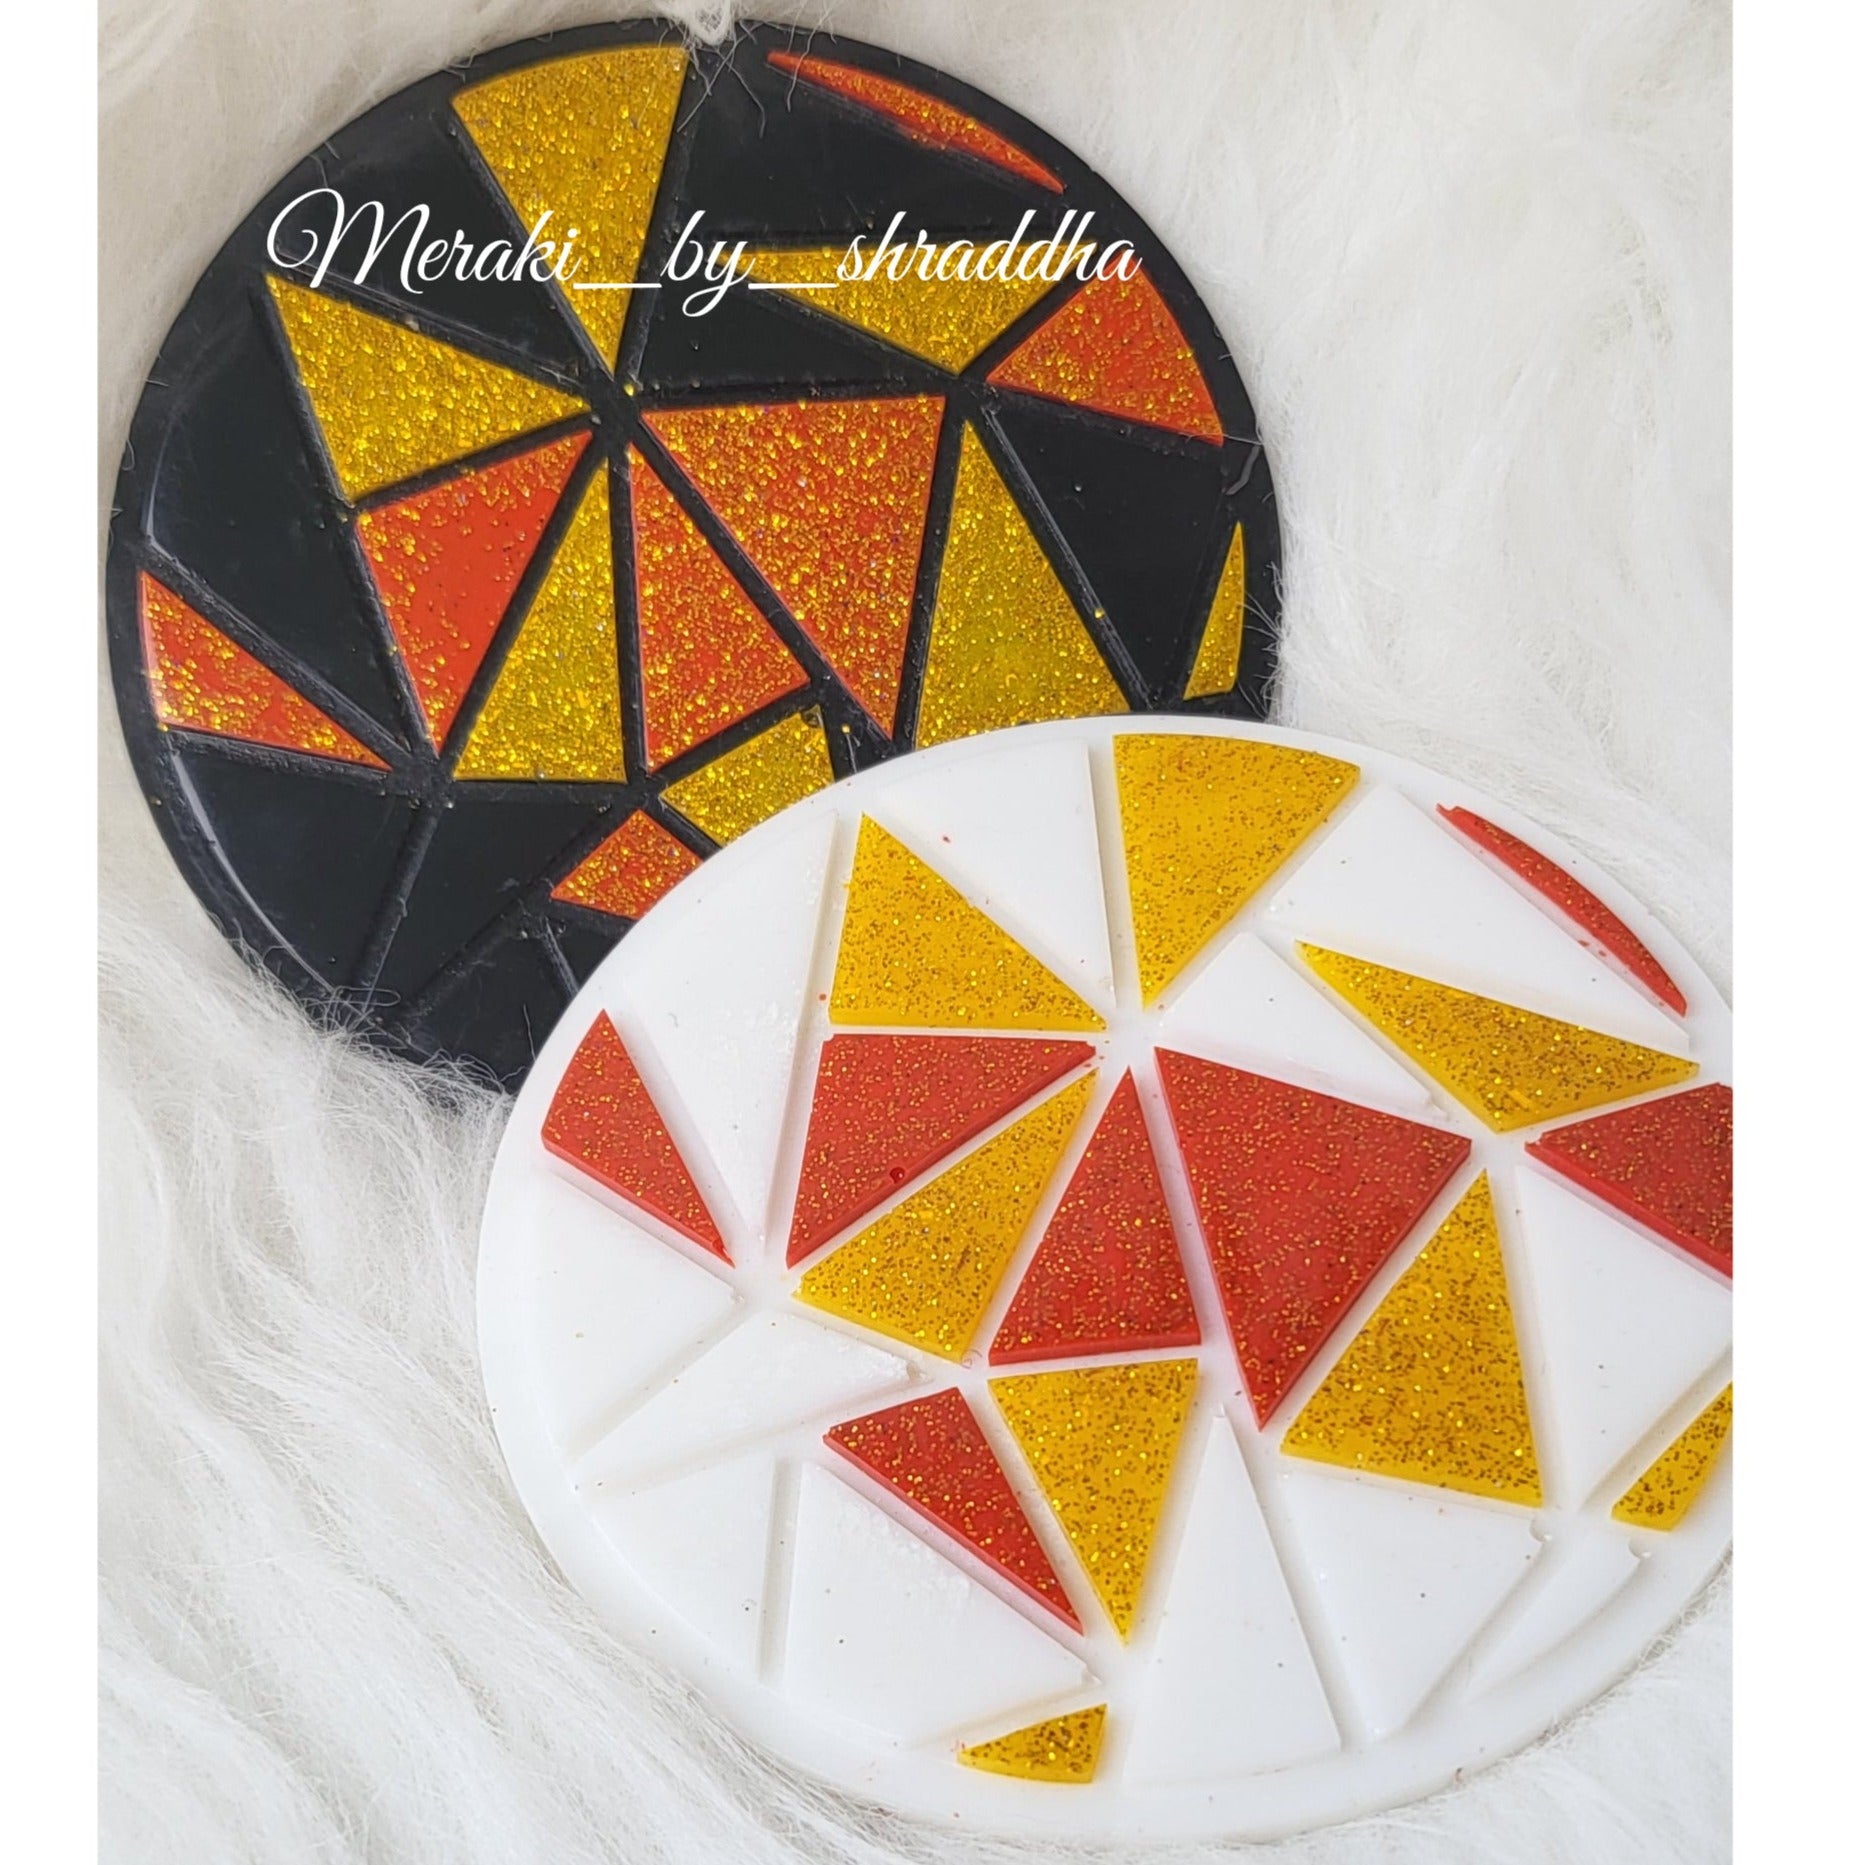 Stained Glass Coaster Mould - The Mould Story